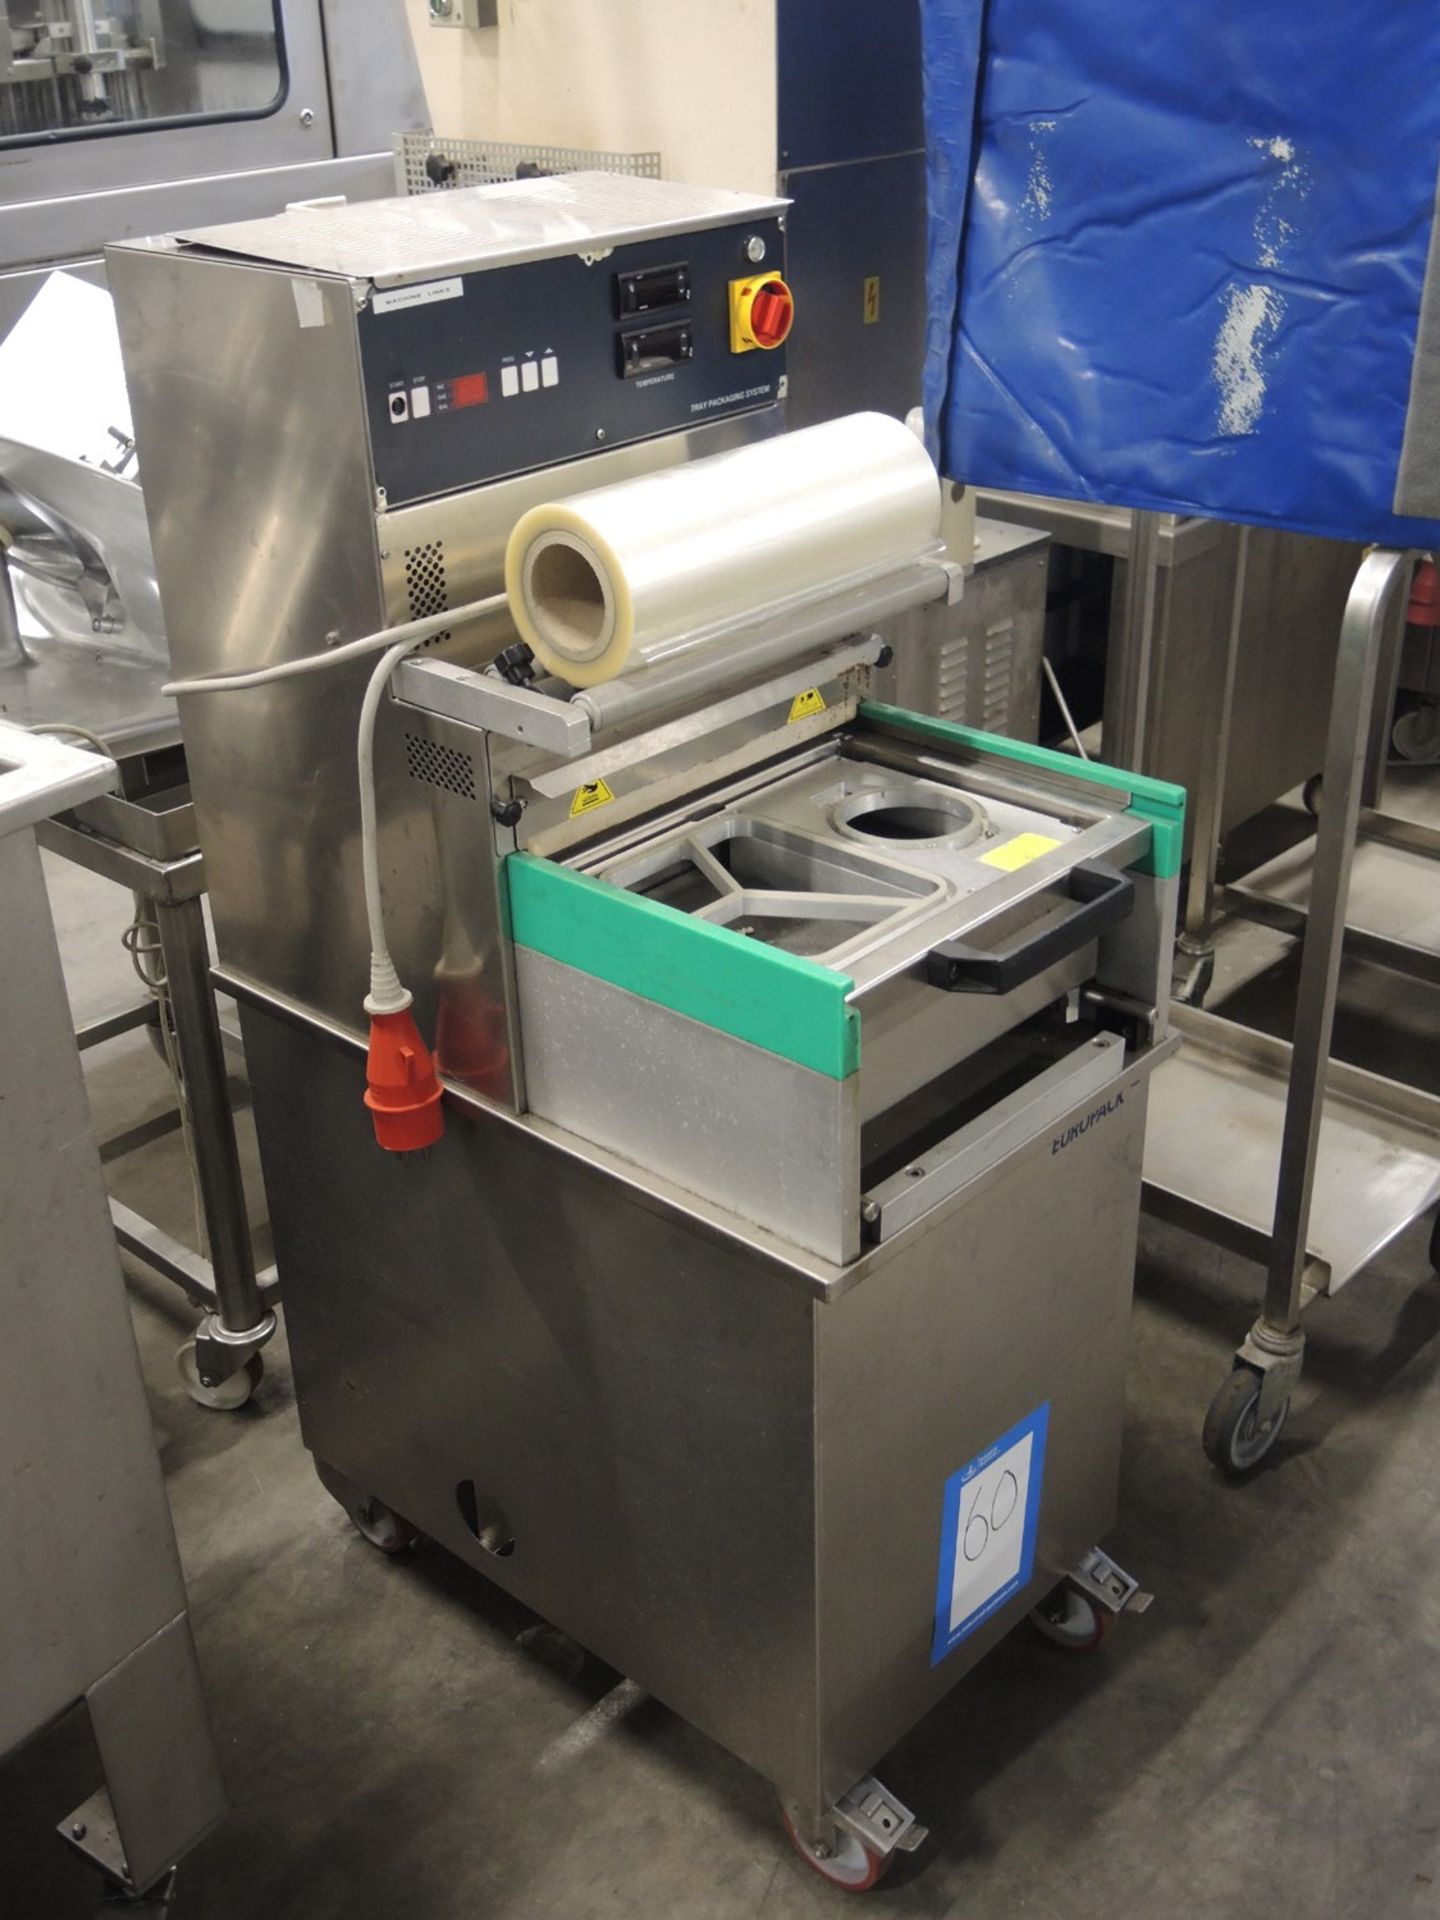 Europack tray sealer, type: TPS Compact, serial number: 03155, 3 Ph, 400 V, 50 Hz, 4 A, missing